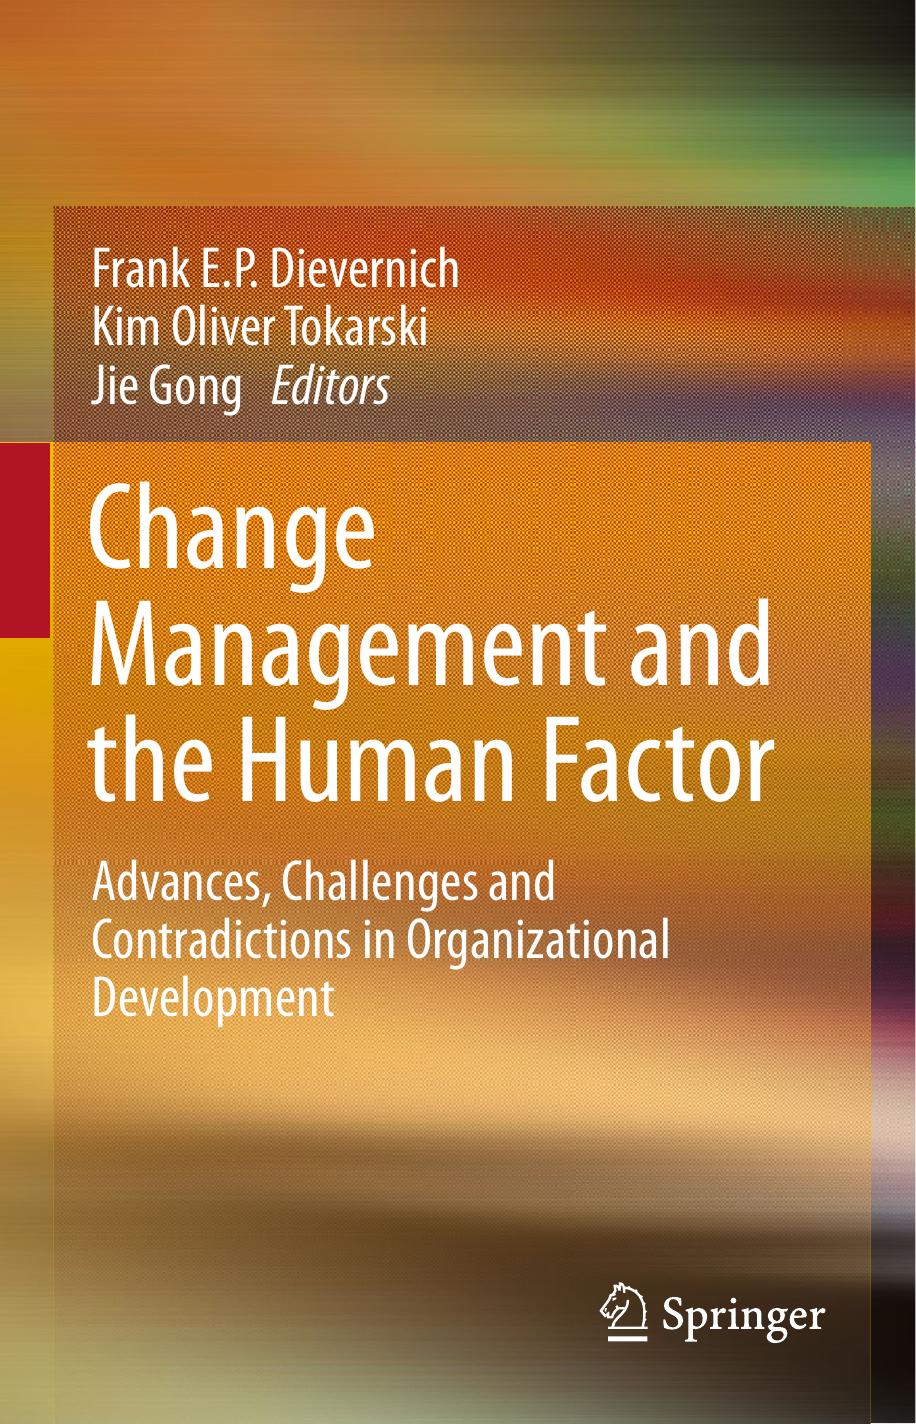 Change Management and the Human Factor: Advances, Challenges and Contradictions in Organizational Development